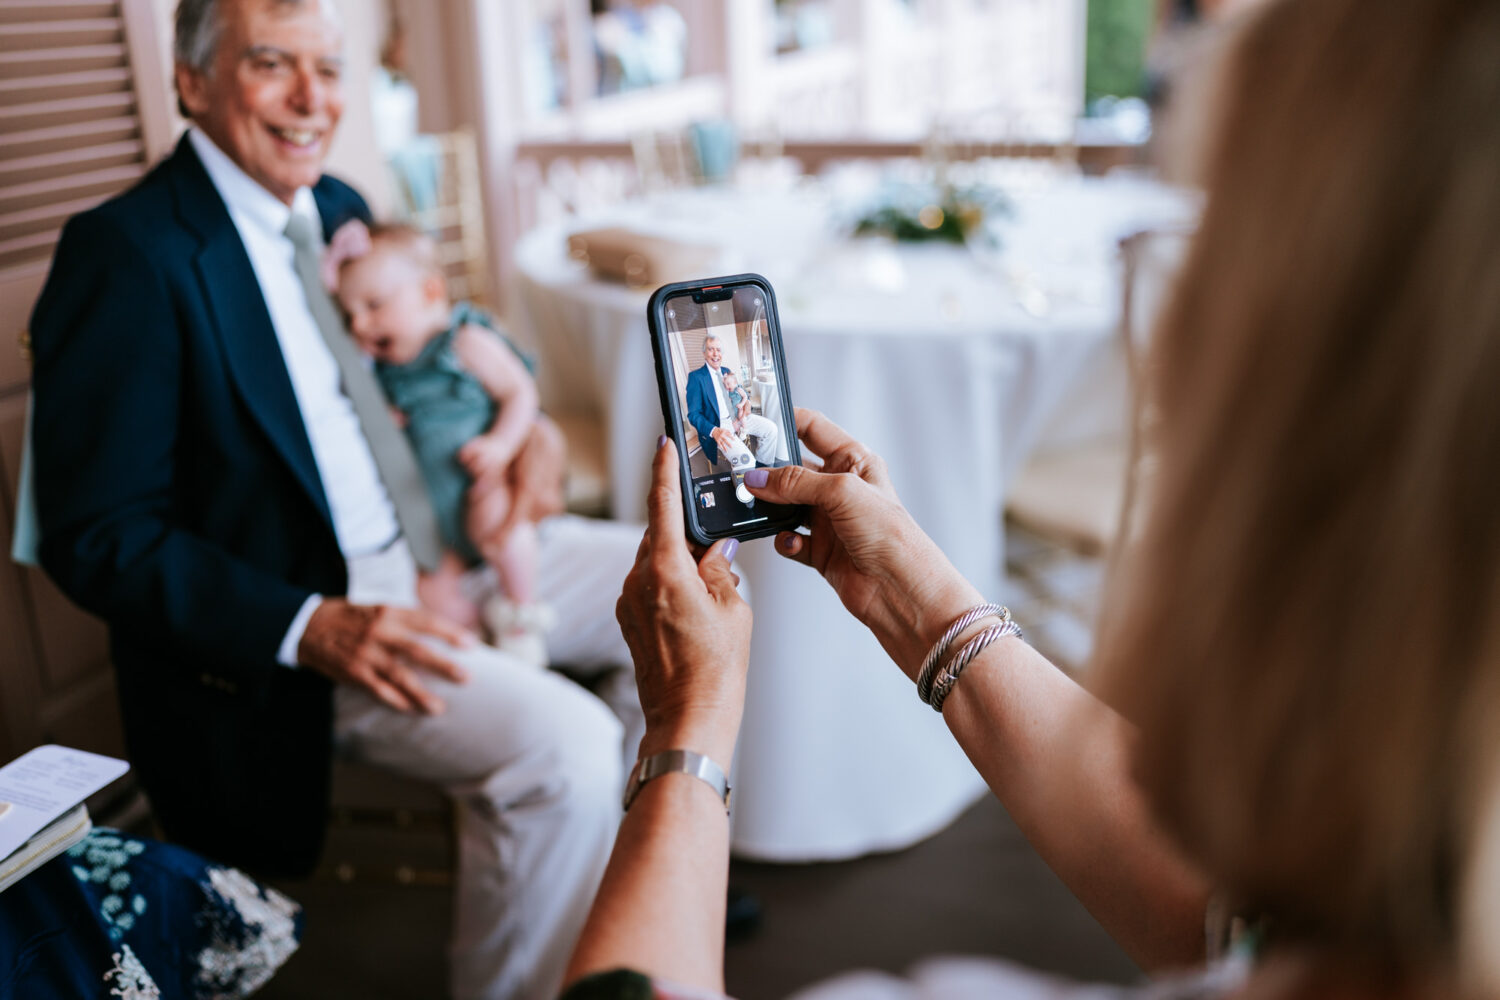 wedding guest taking photo of other wedding guests